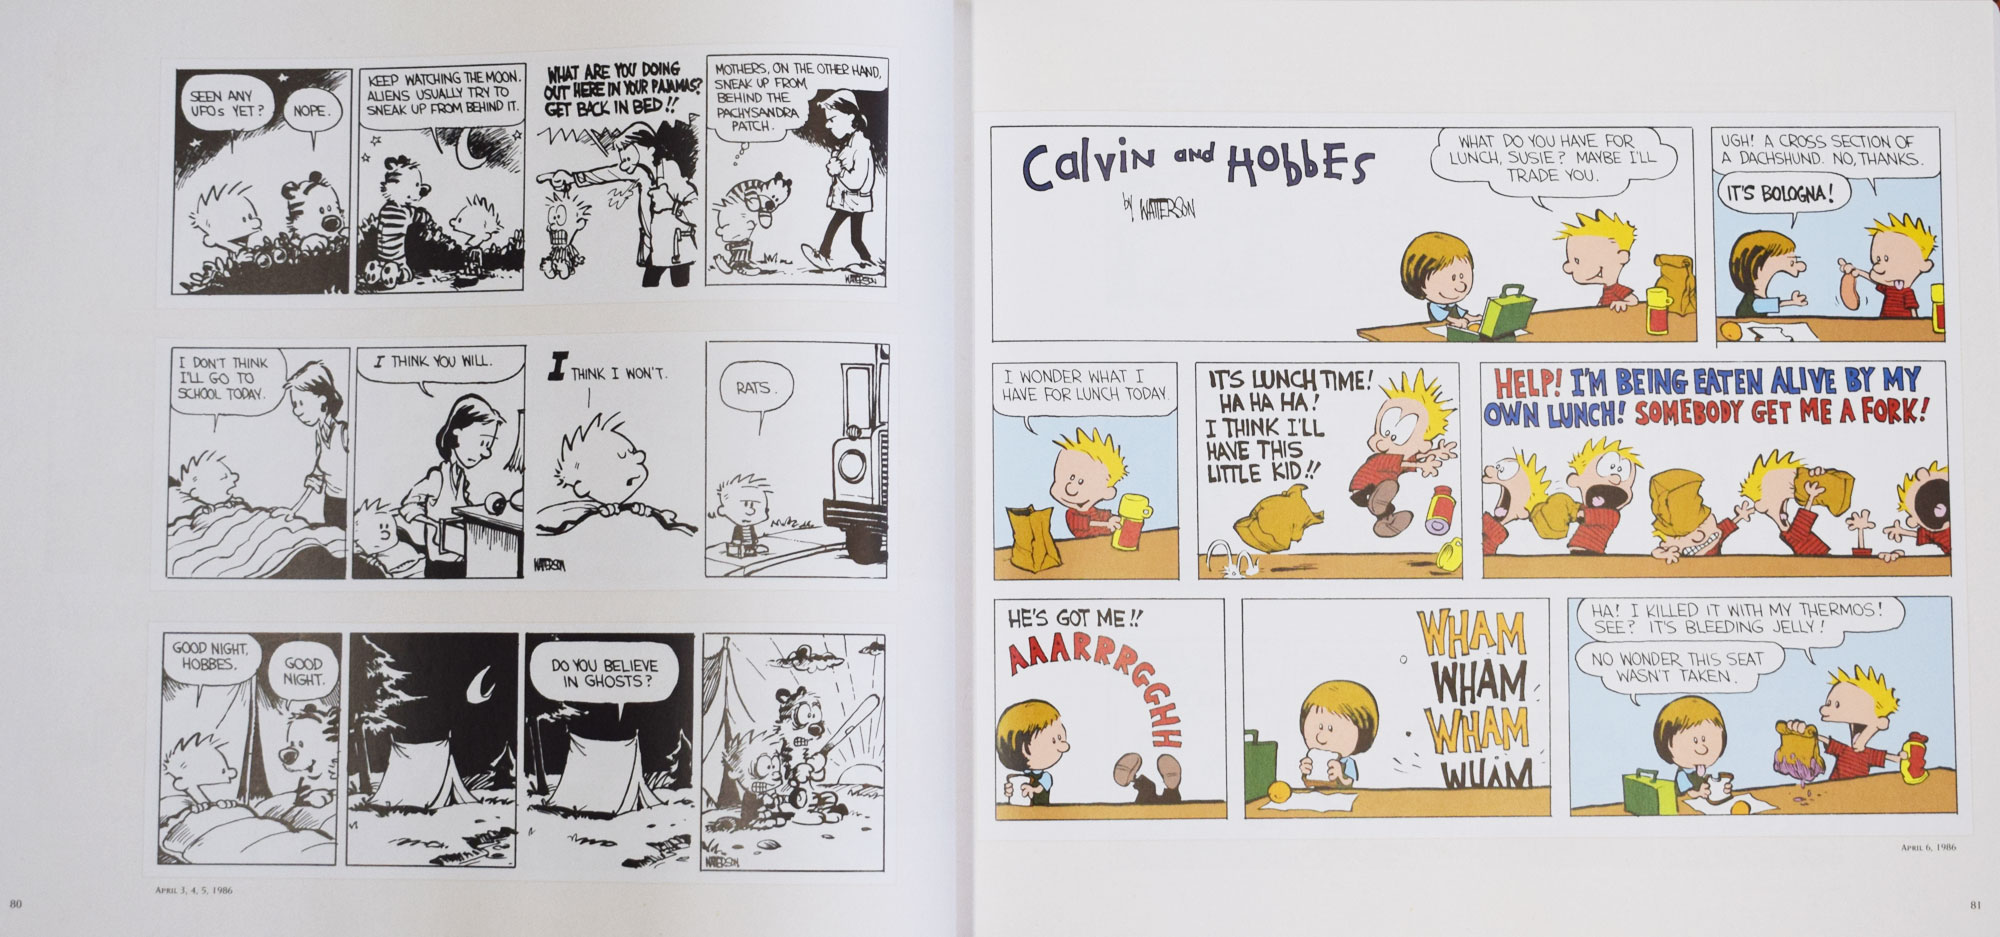 The Complete Calvin and Hobbes. 3 volume box set.